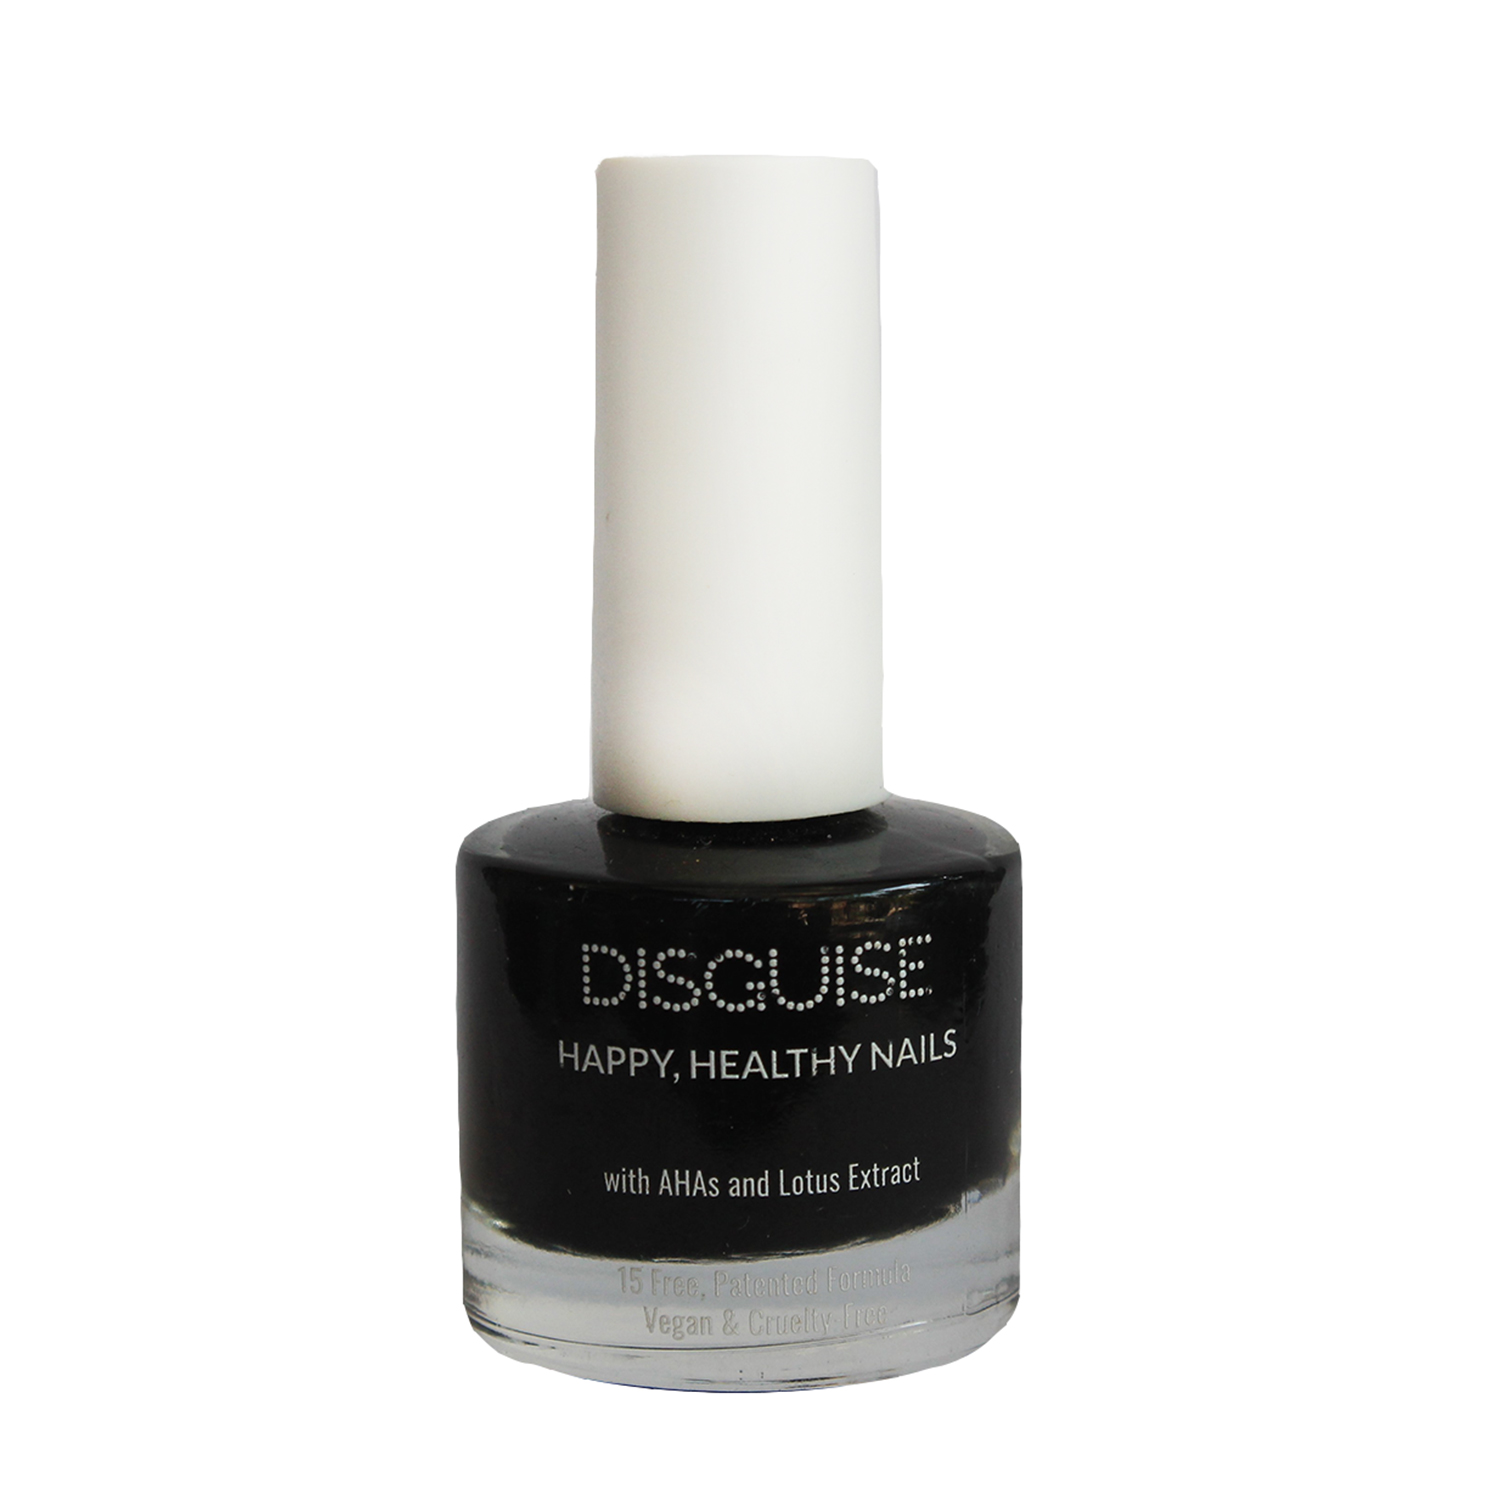 Disguise Cosmetics Happy, Healthy Nails, 9ml-122 Wreckless Black